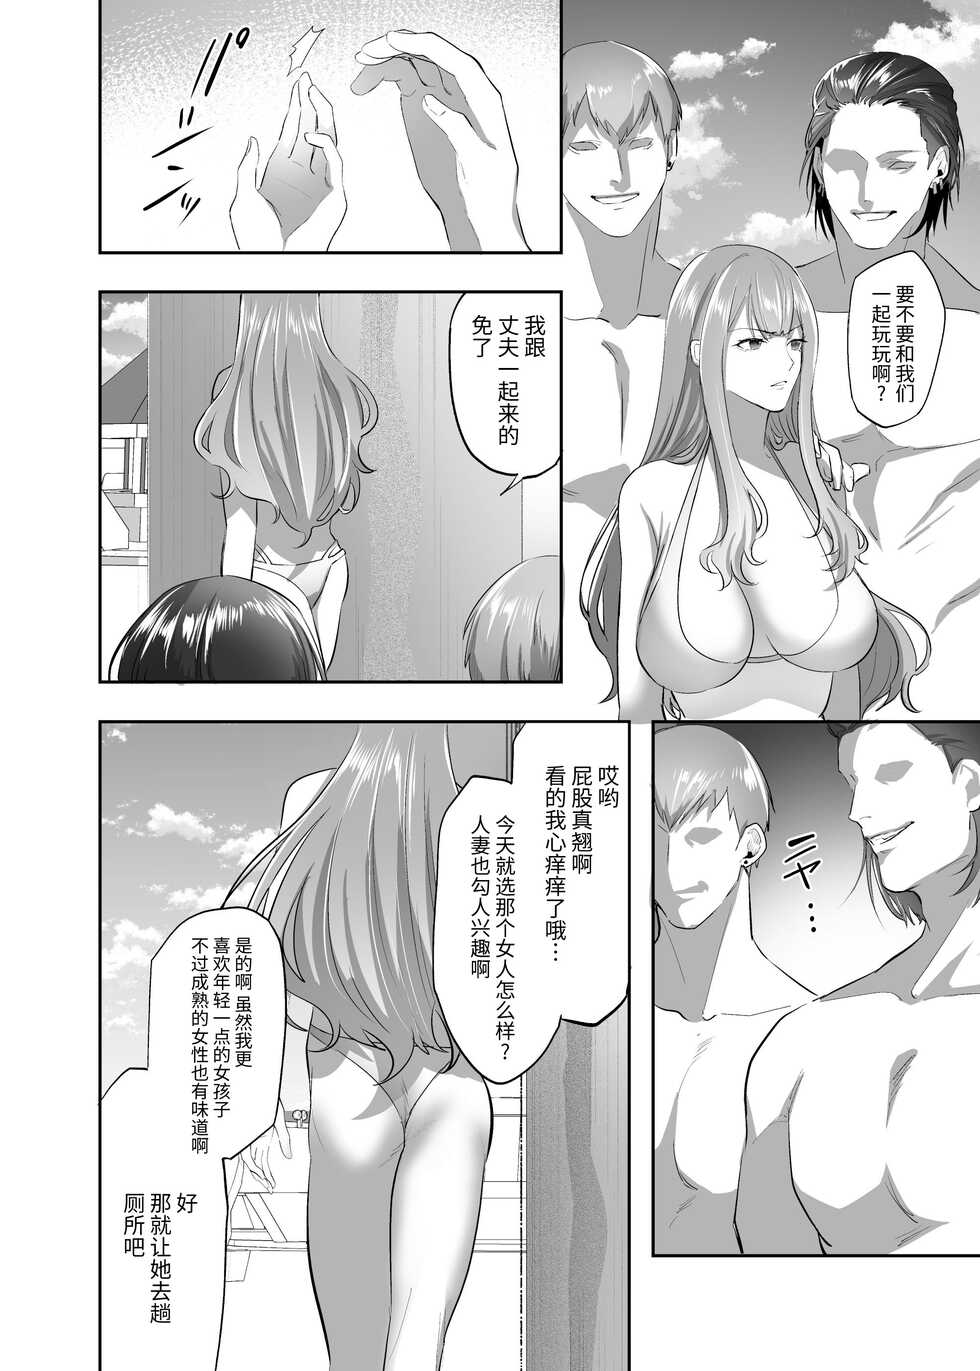 [Hyoui Lover (Duokuma)] NTR (Cuckold / Cuckold) Married Woman [Chinese] [牛肝菌汉化] - Page 7